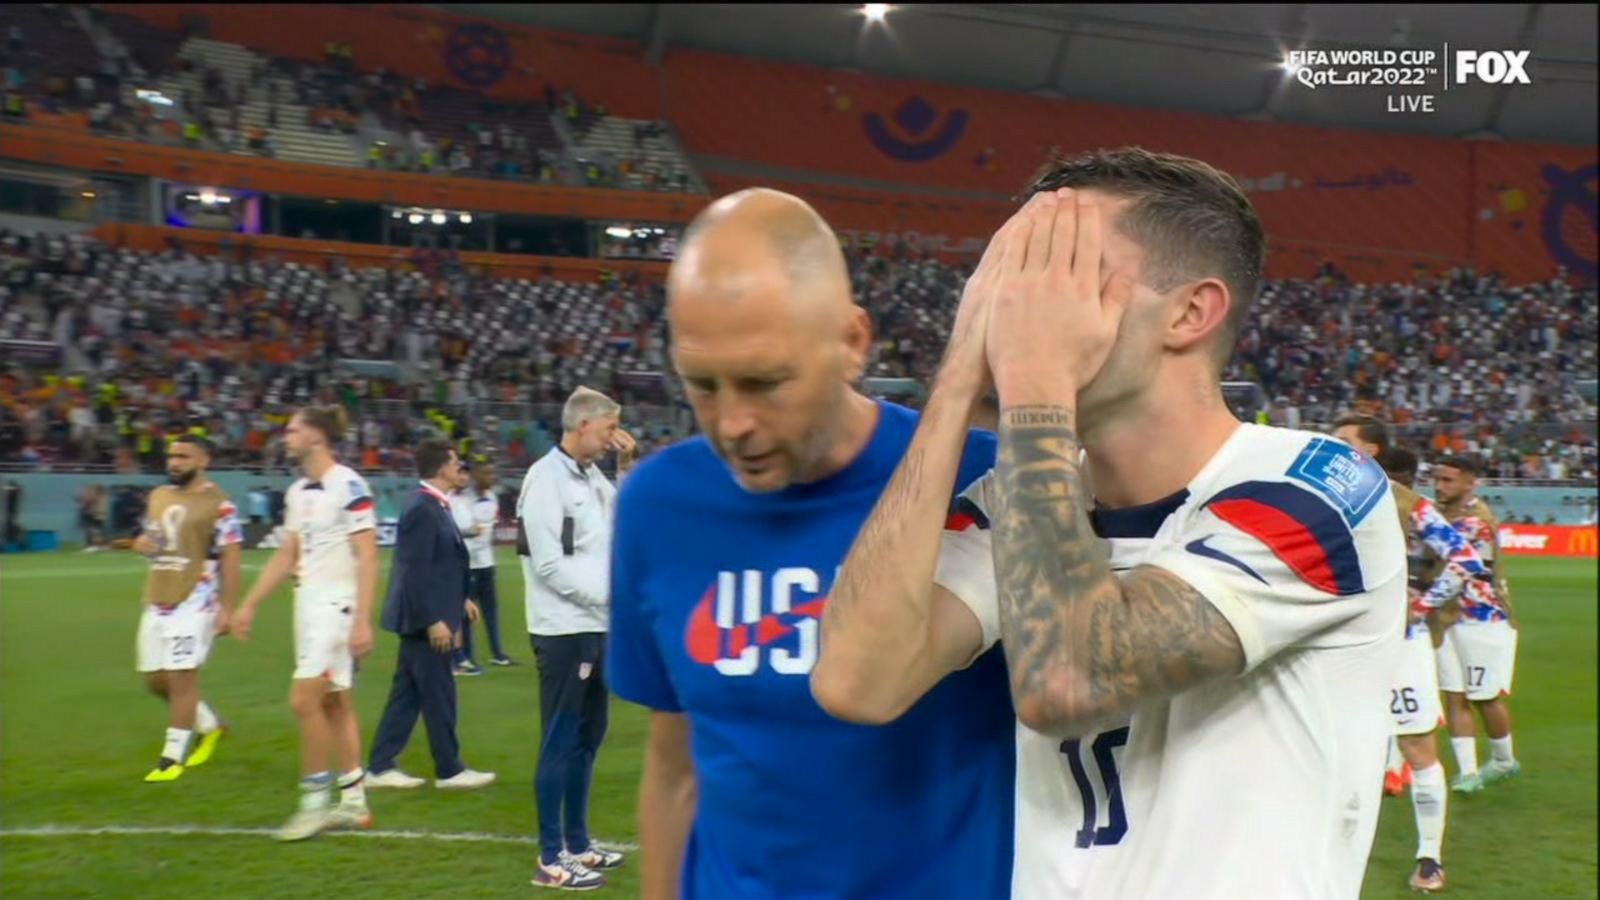 USMNT defeated at World Cup